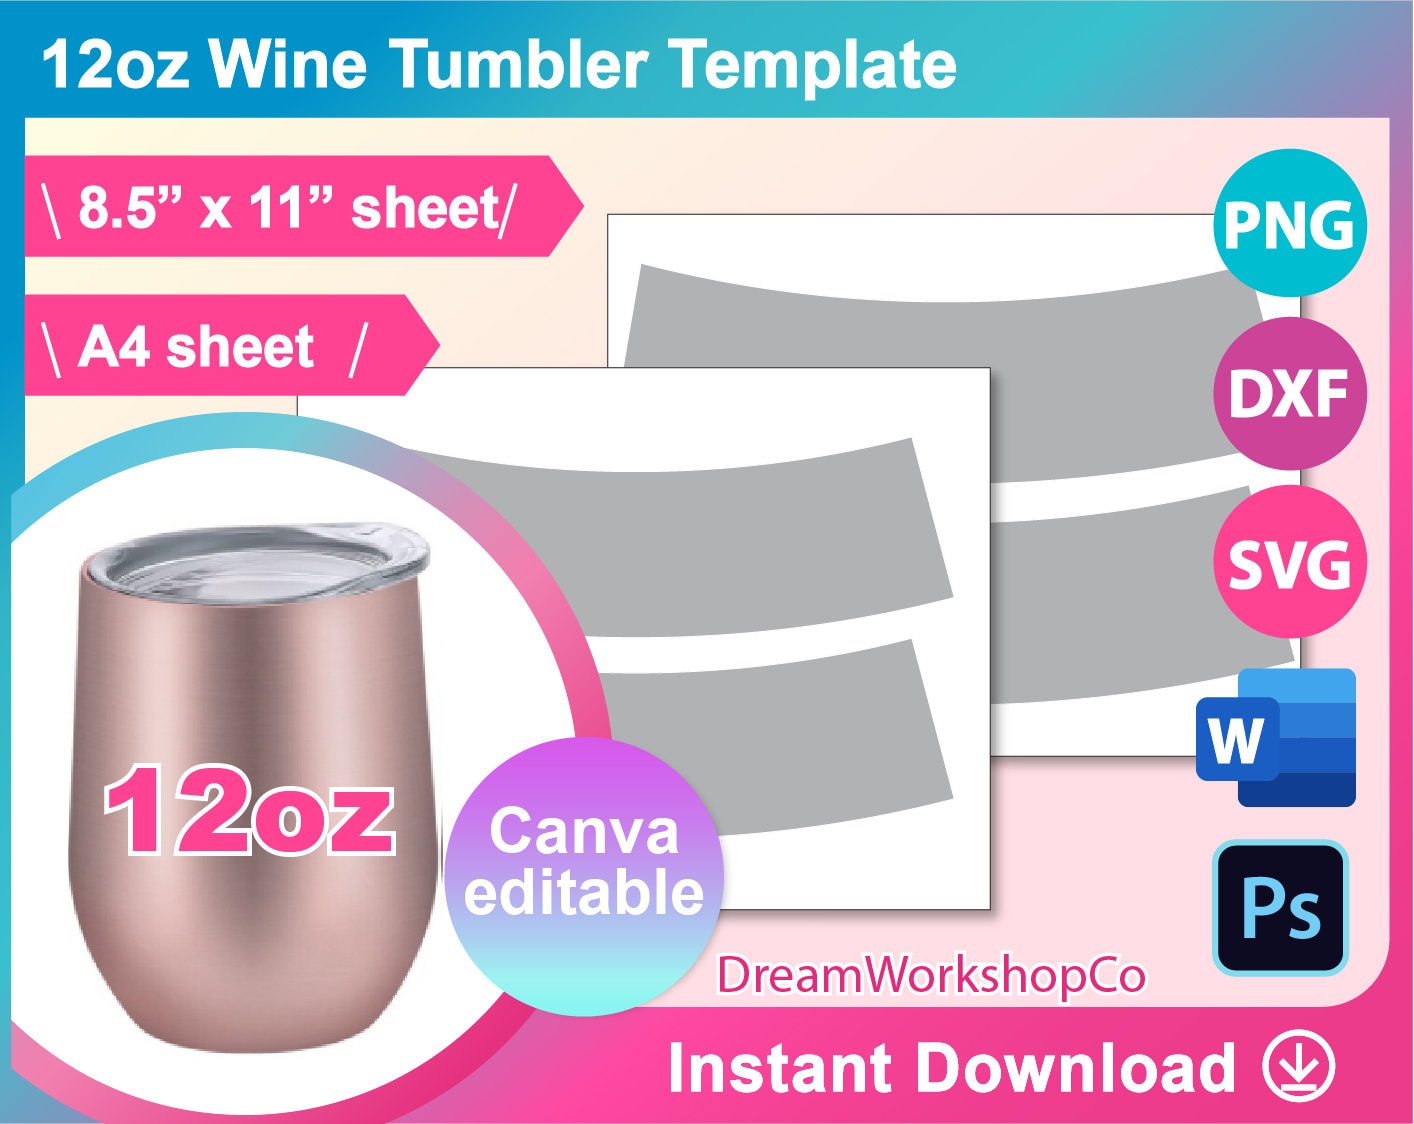 12oz Wine Tumbler Template, Sublimation, Canva, Ms Word, PSD, PNG, SVG, Dxf,  A4, Letter Size Sheet, Printable, Instant Download 